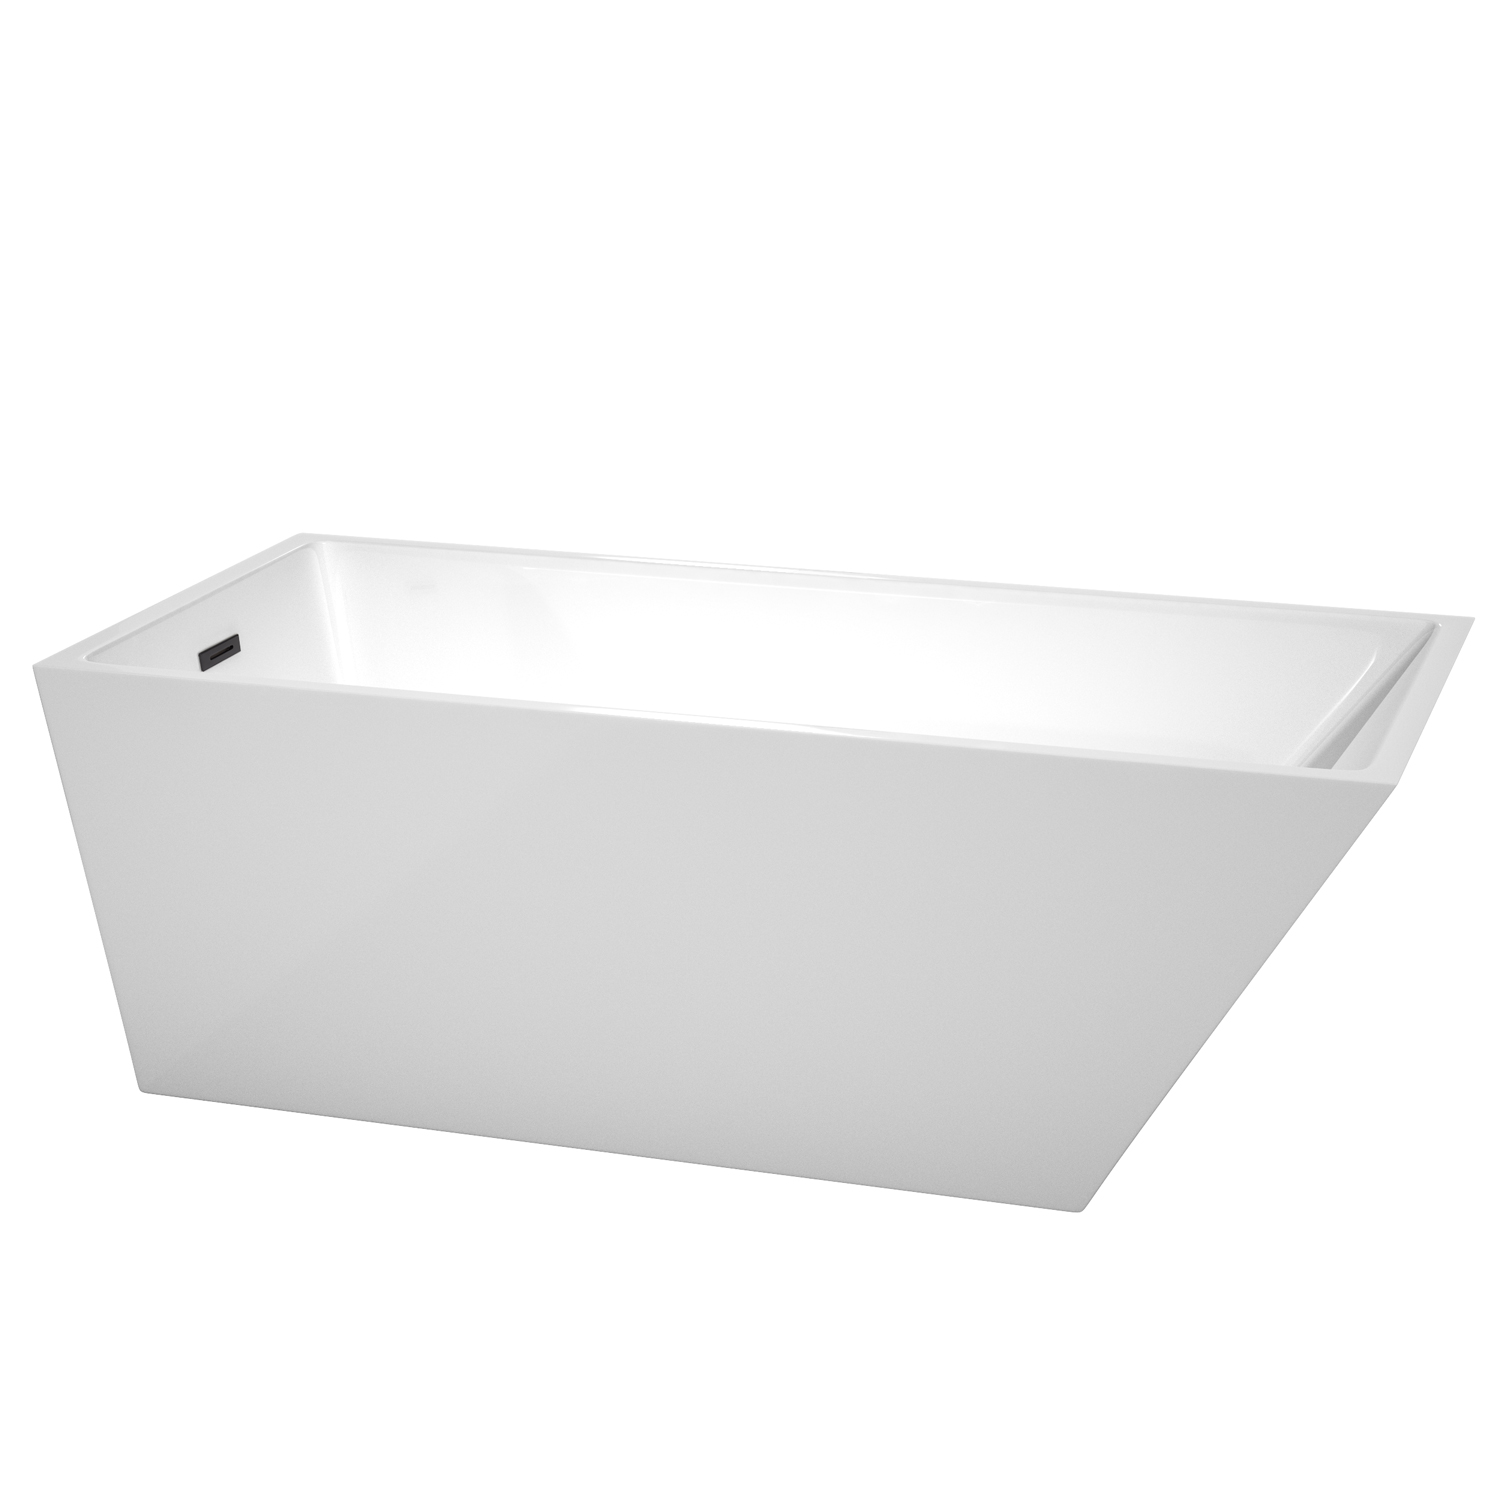 67" Freestanding Bathtub in White with Matte Black Drain and Overflow Trim Finish